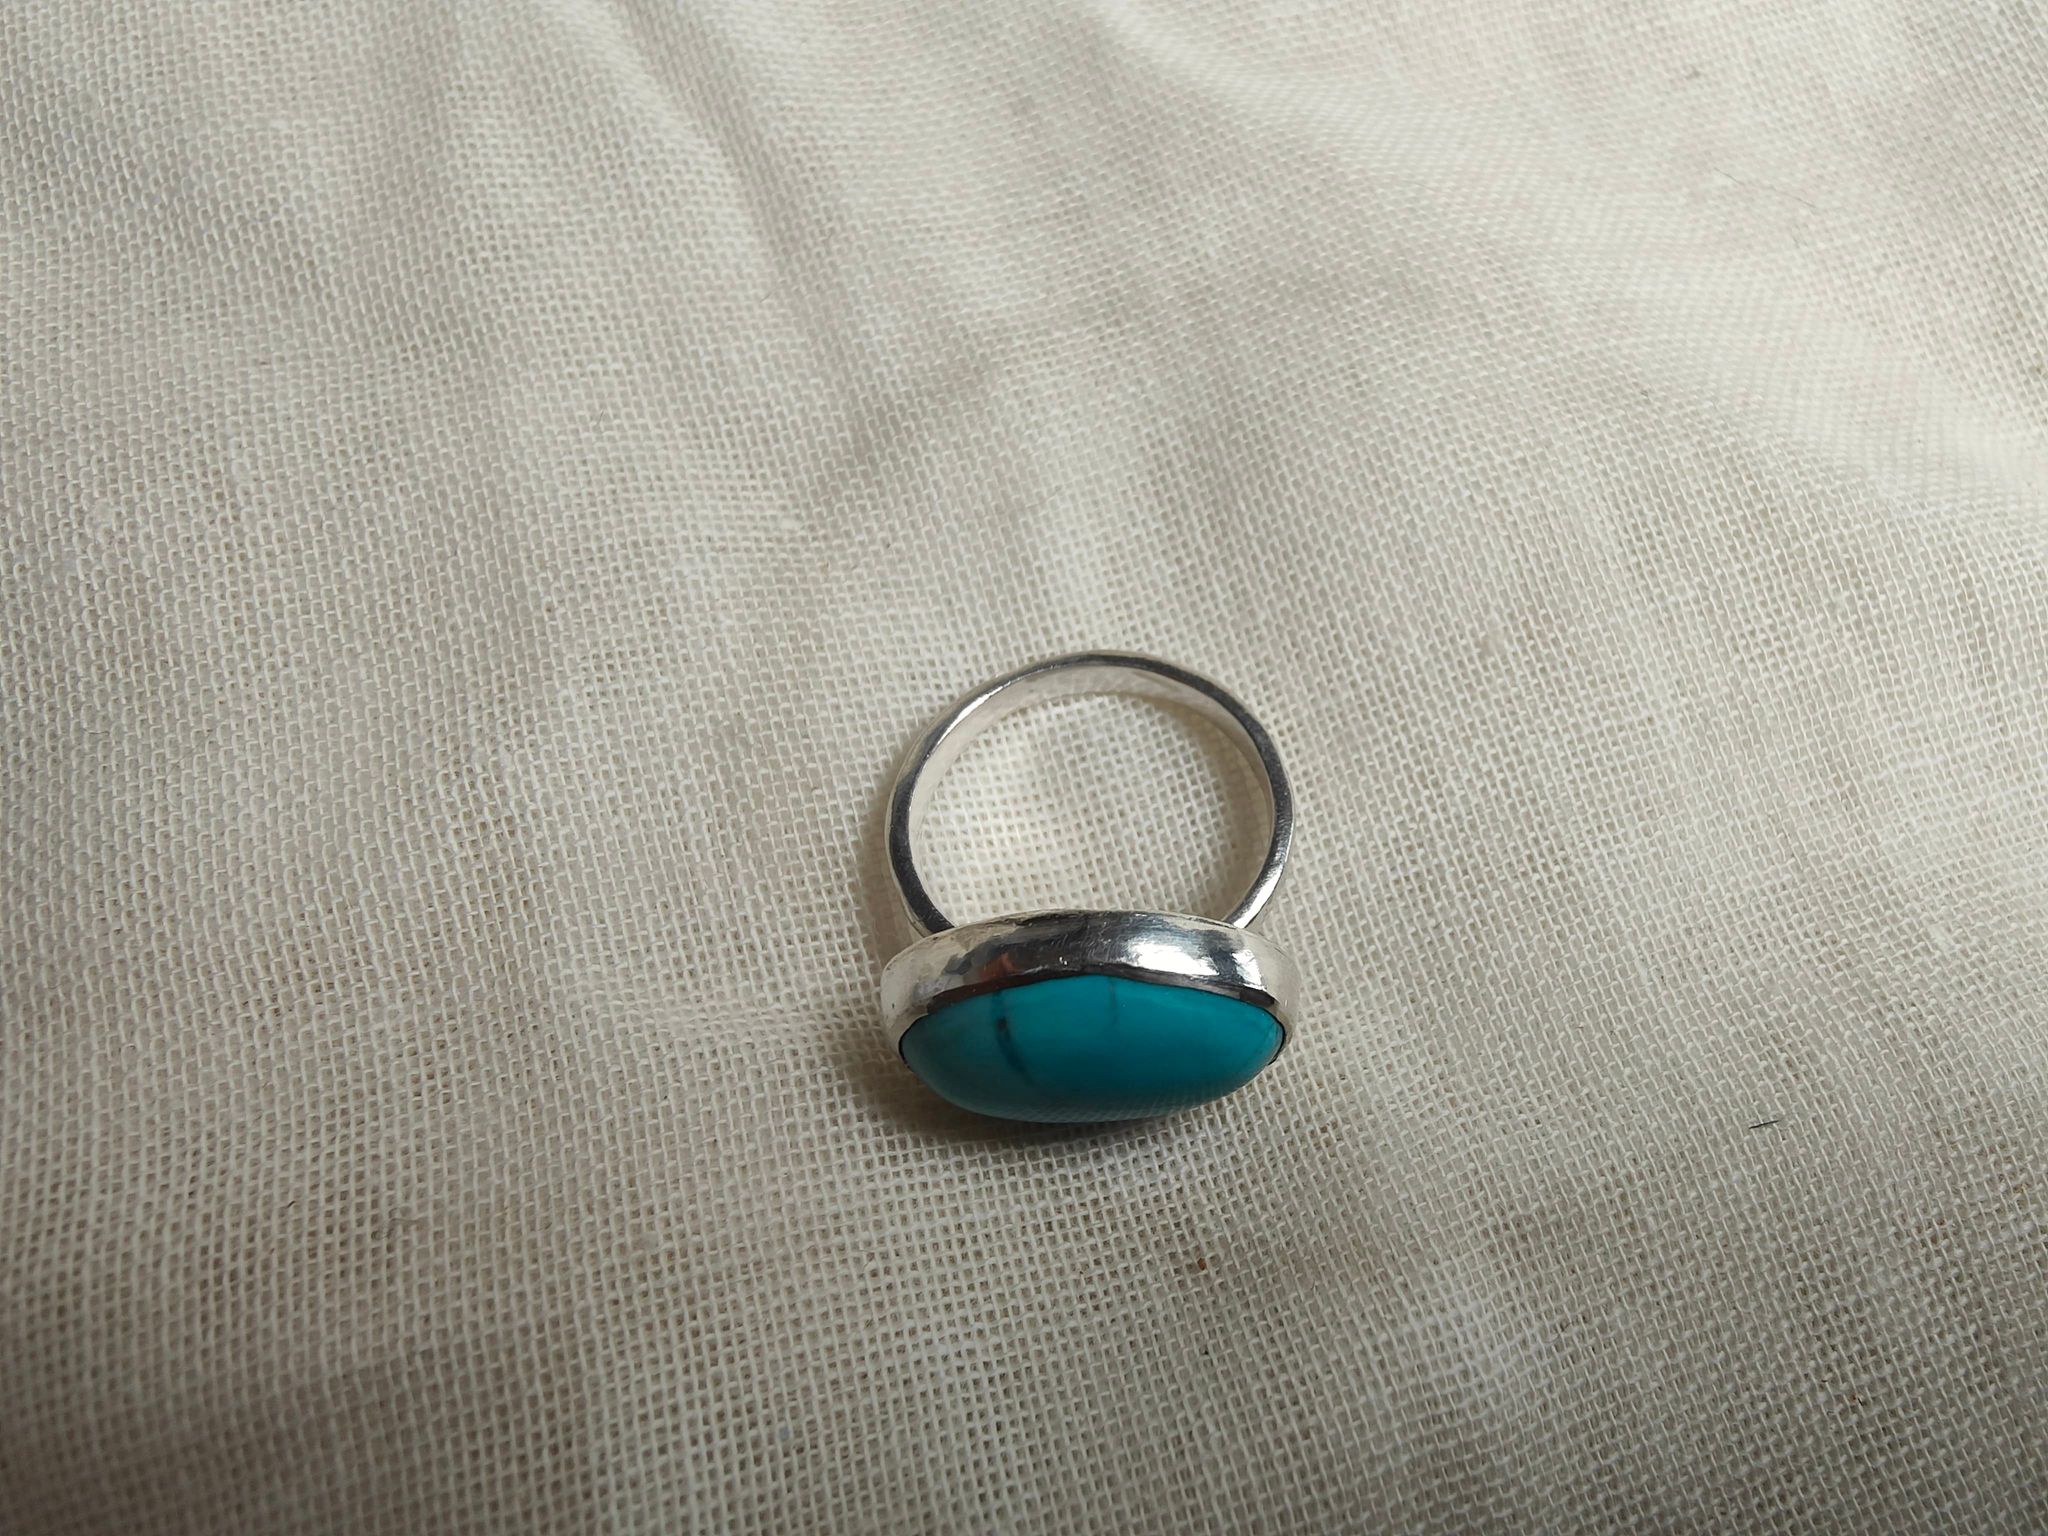 Large Oval Turquoise Ring